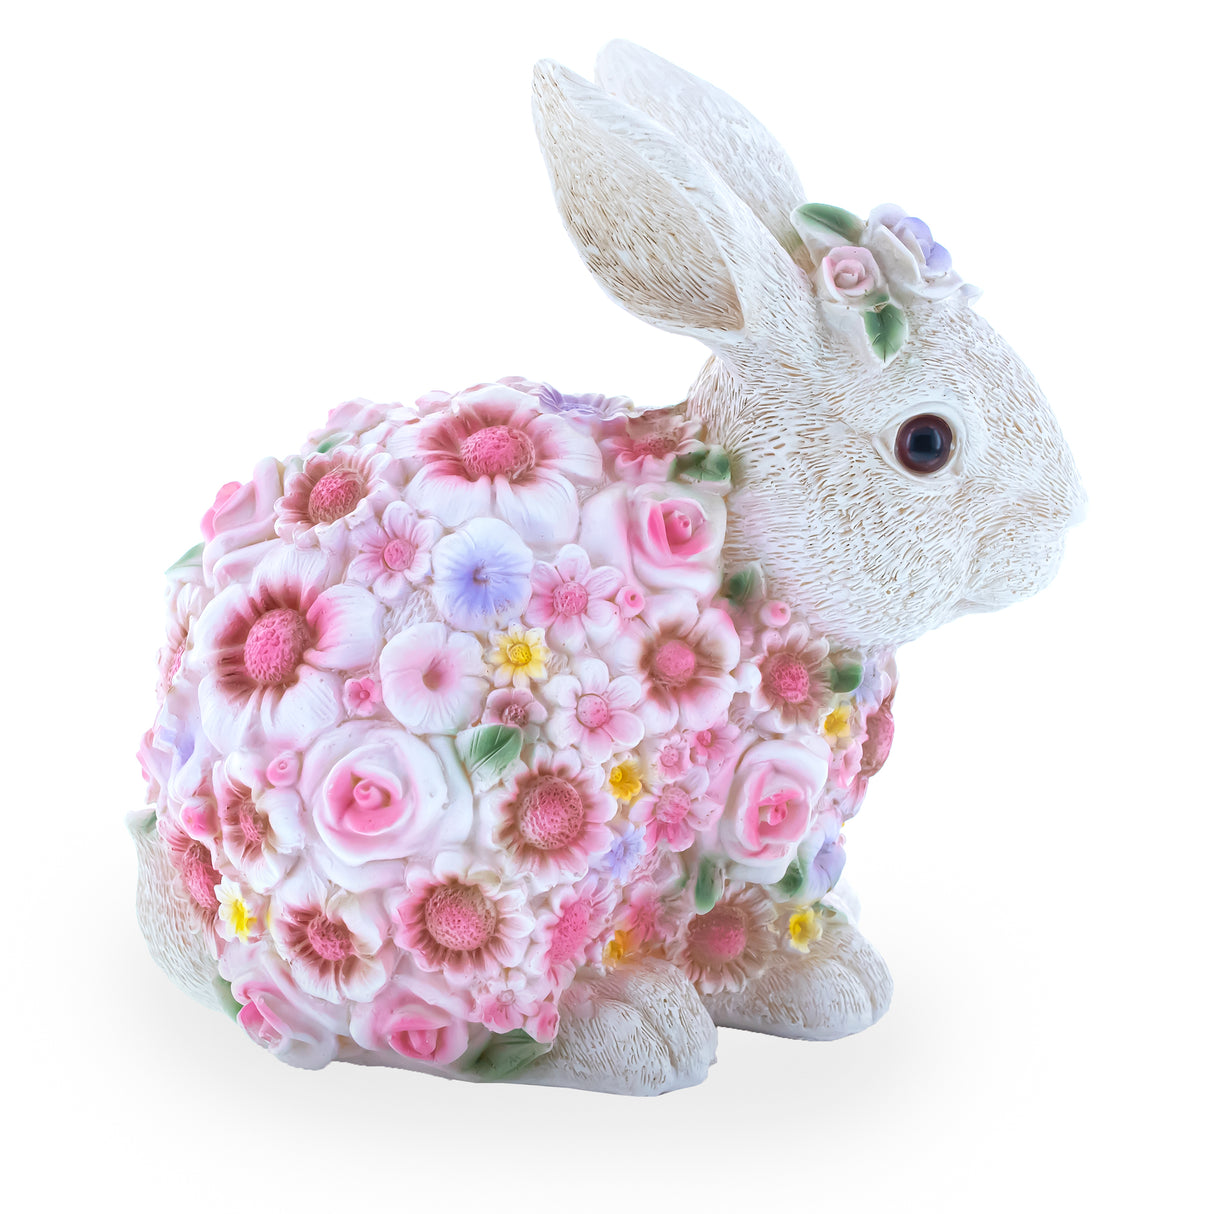 Floral-Embraced Bunny: Enchanting Springtime Figurine ,dimensions in inches: 7.1 x 4.4 x 6.1